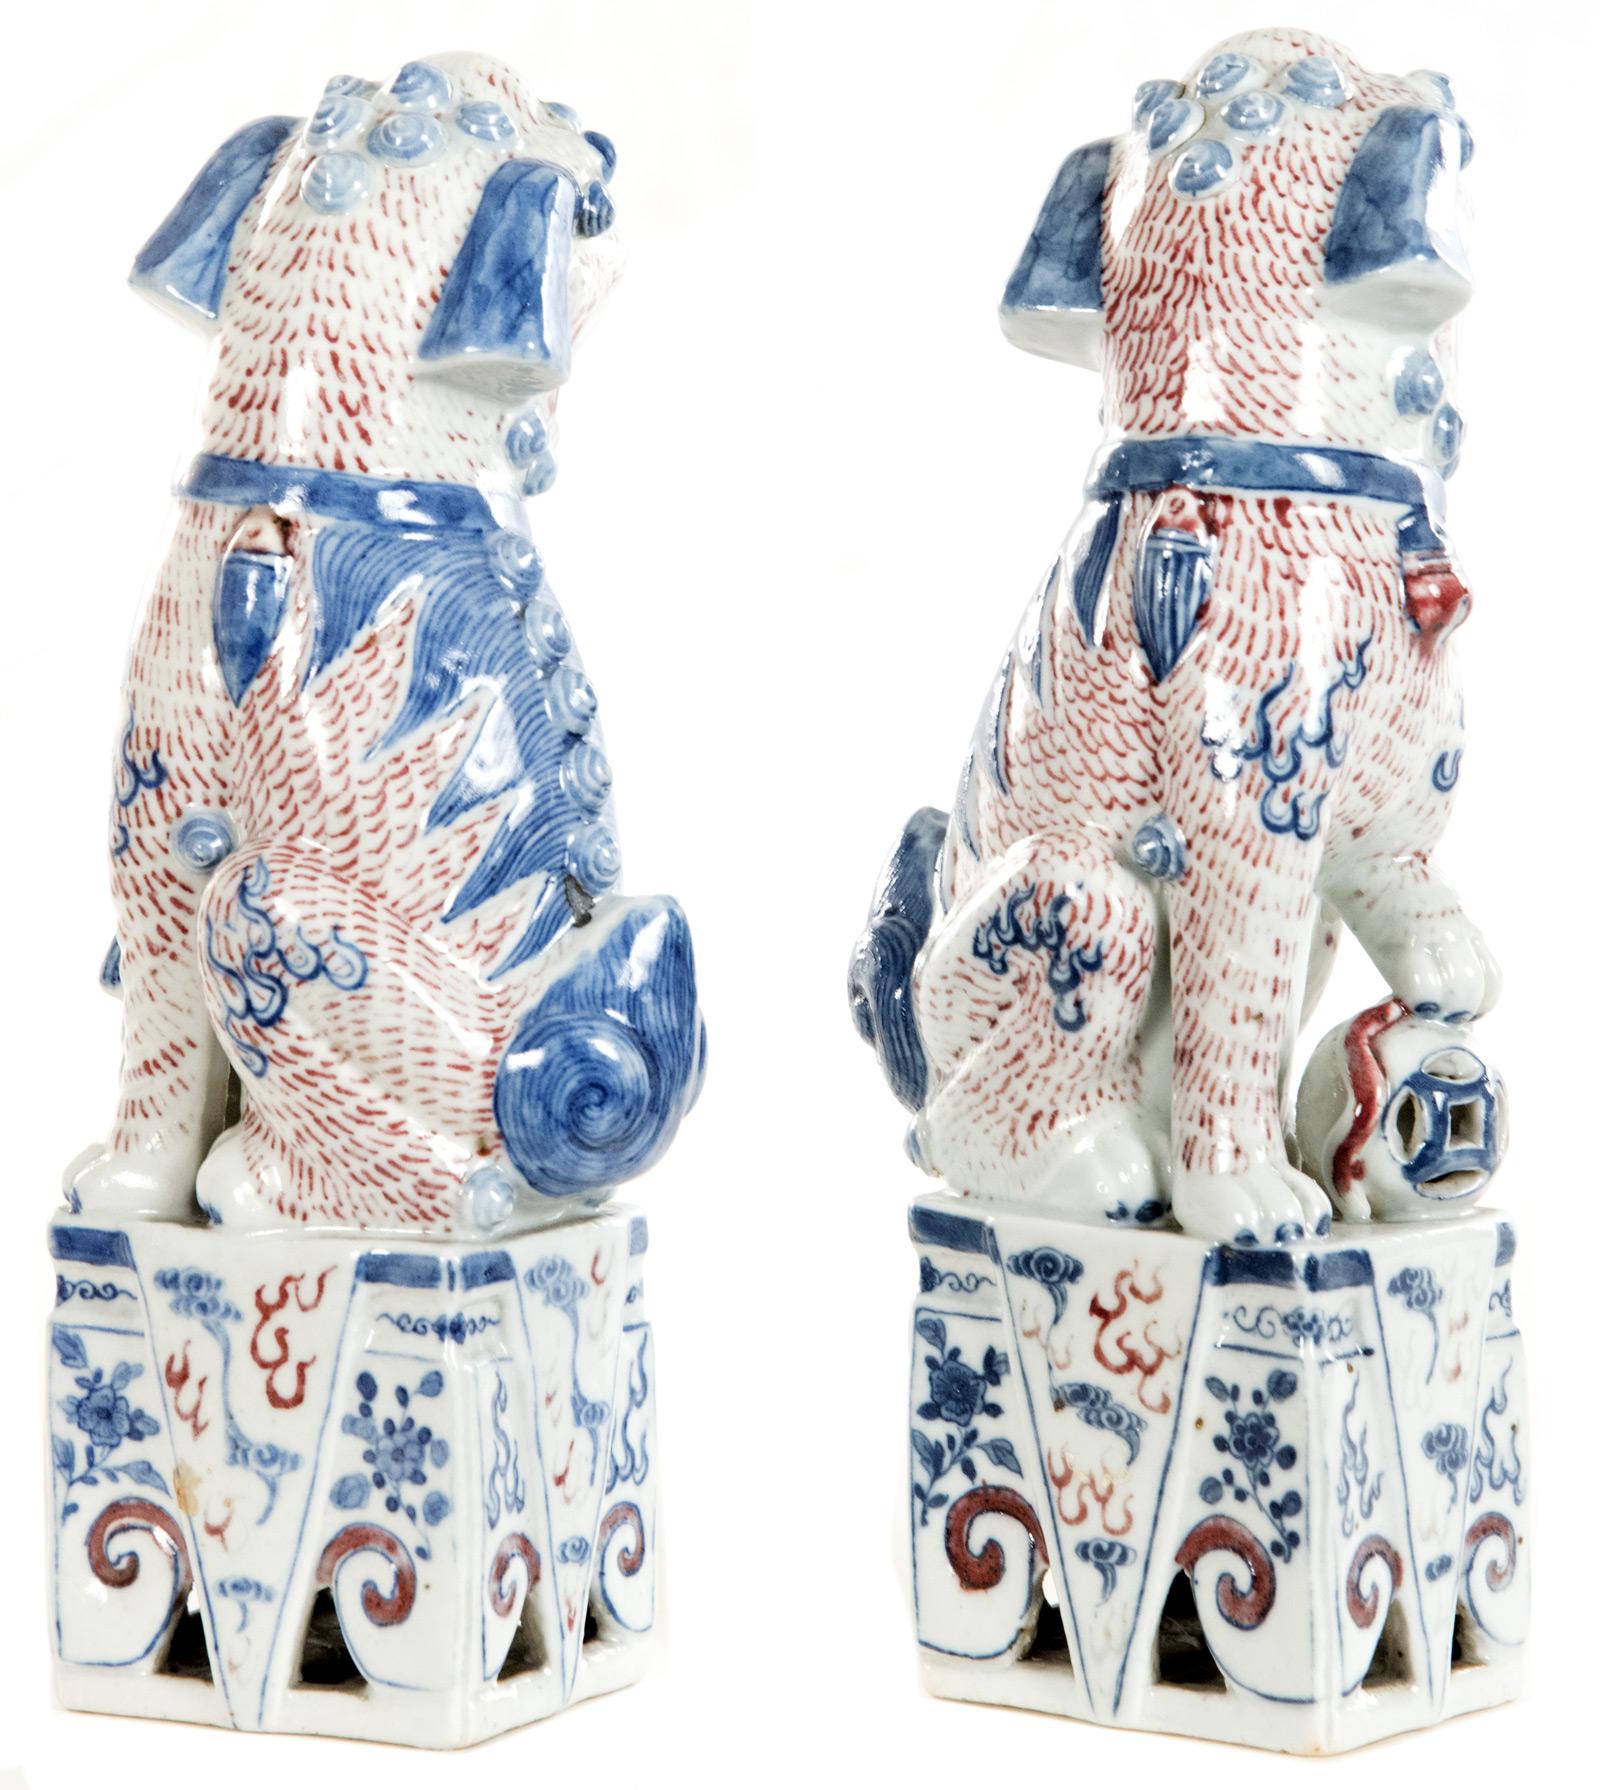 A pair of hand-painted polychrome Chinese foo dogs having a white ground colour decorated with red and blue stylized details, the male with a paw on a ball and the female with a suckling cub, raised on square pierced plinths. Chinese Foo dogs are